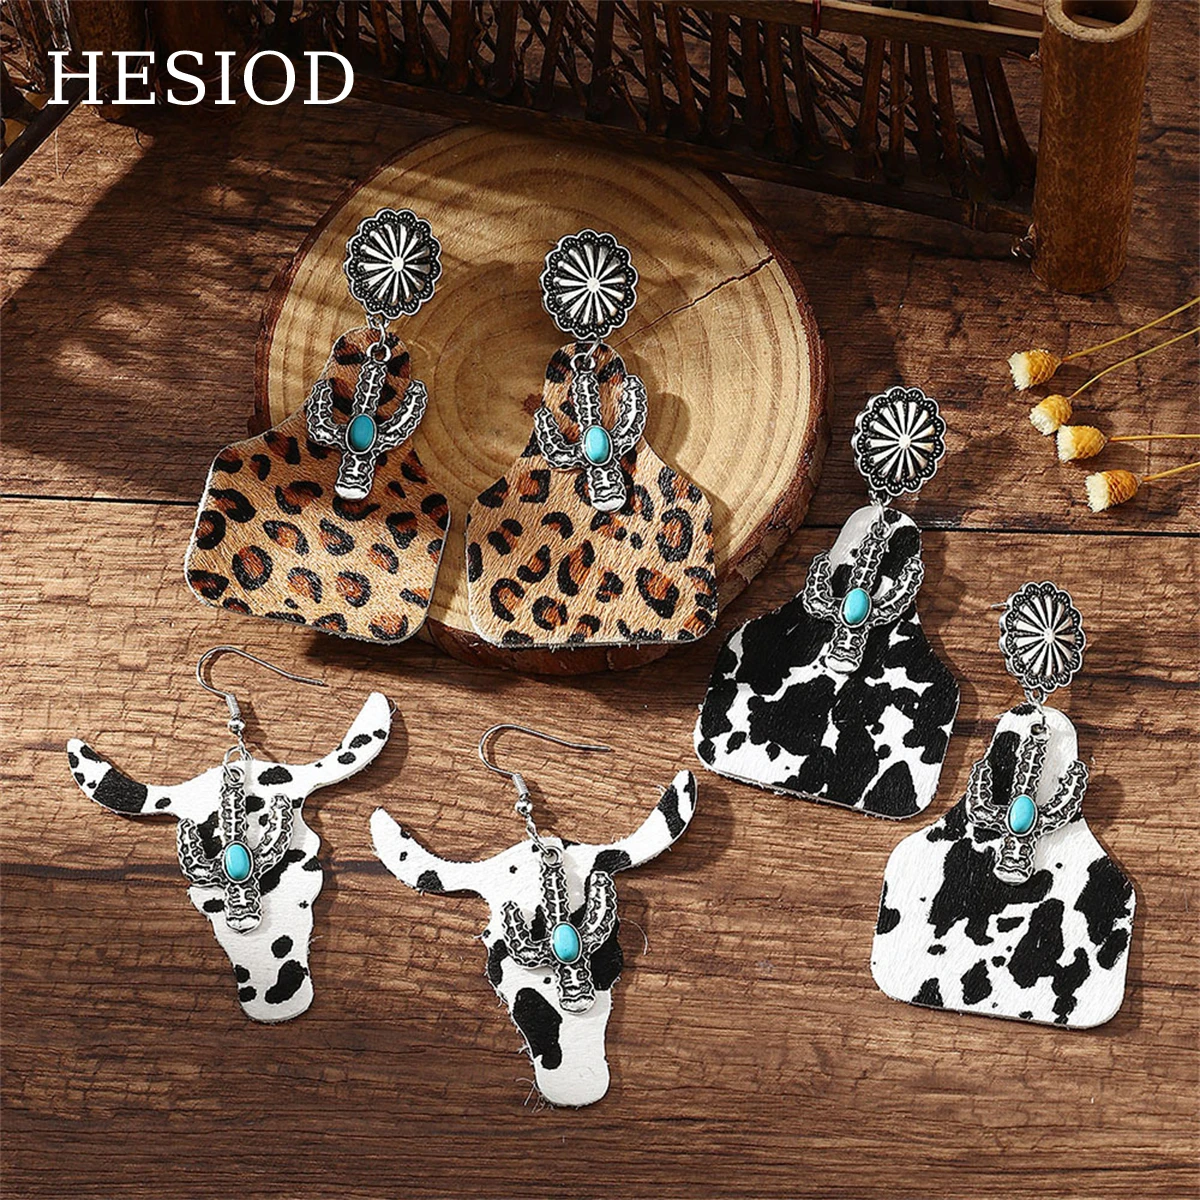 

New Vintage Cattle Head Cow/Leopard Pattern Cactus Pendant Hanging Dangle Earrings For Women Piercing Jewelry Accessories Gifts